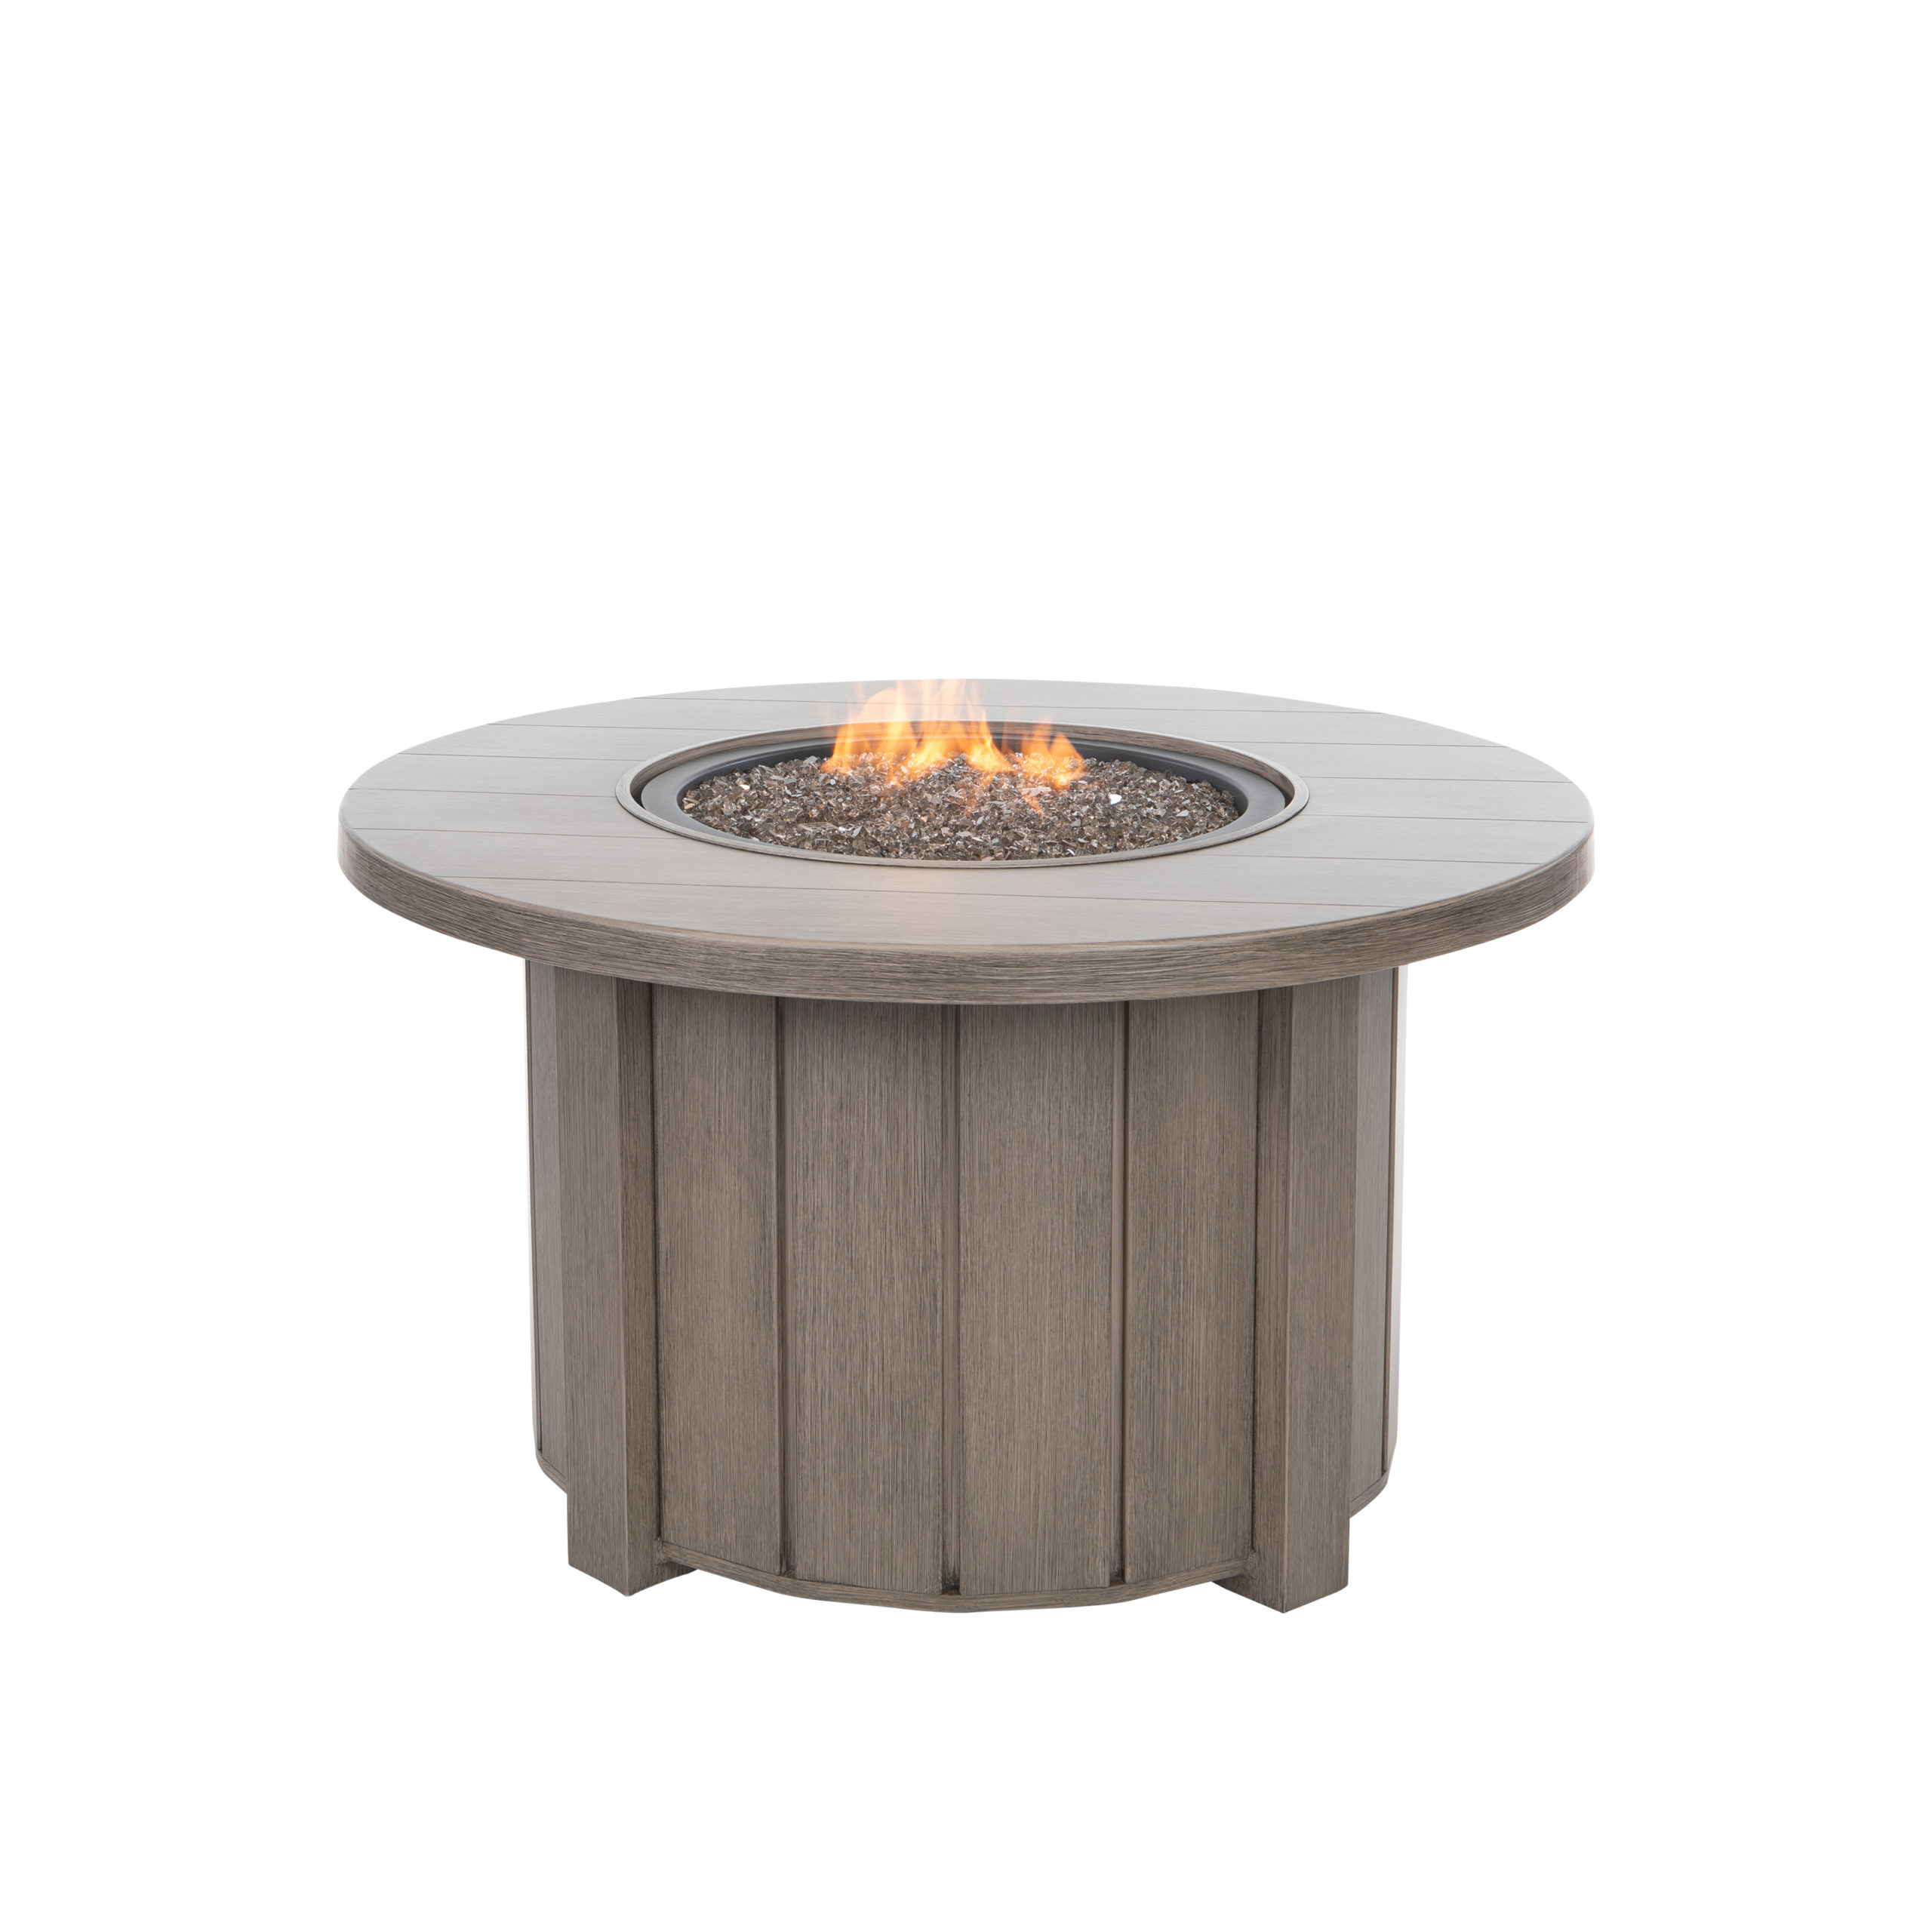 Trevi 42 Round Fire Pit Ebel Inc, 42 Inch Fire Pit Table